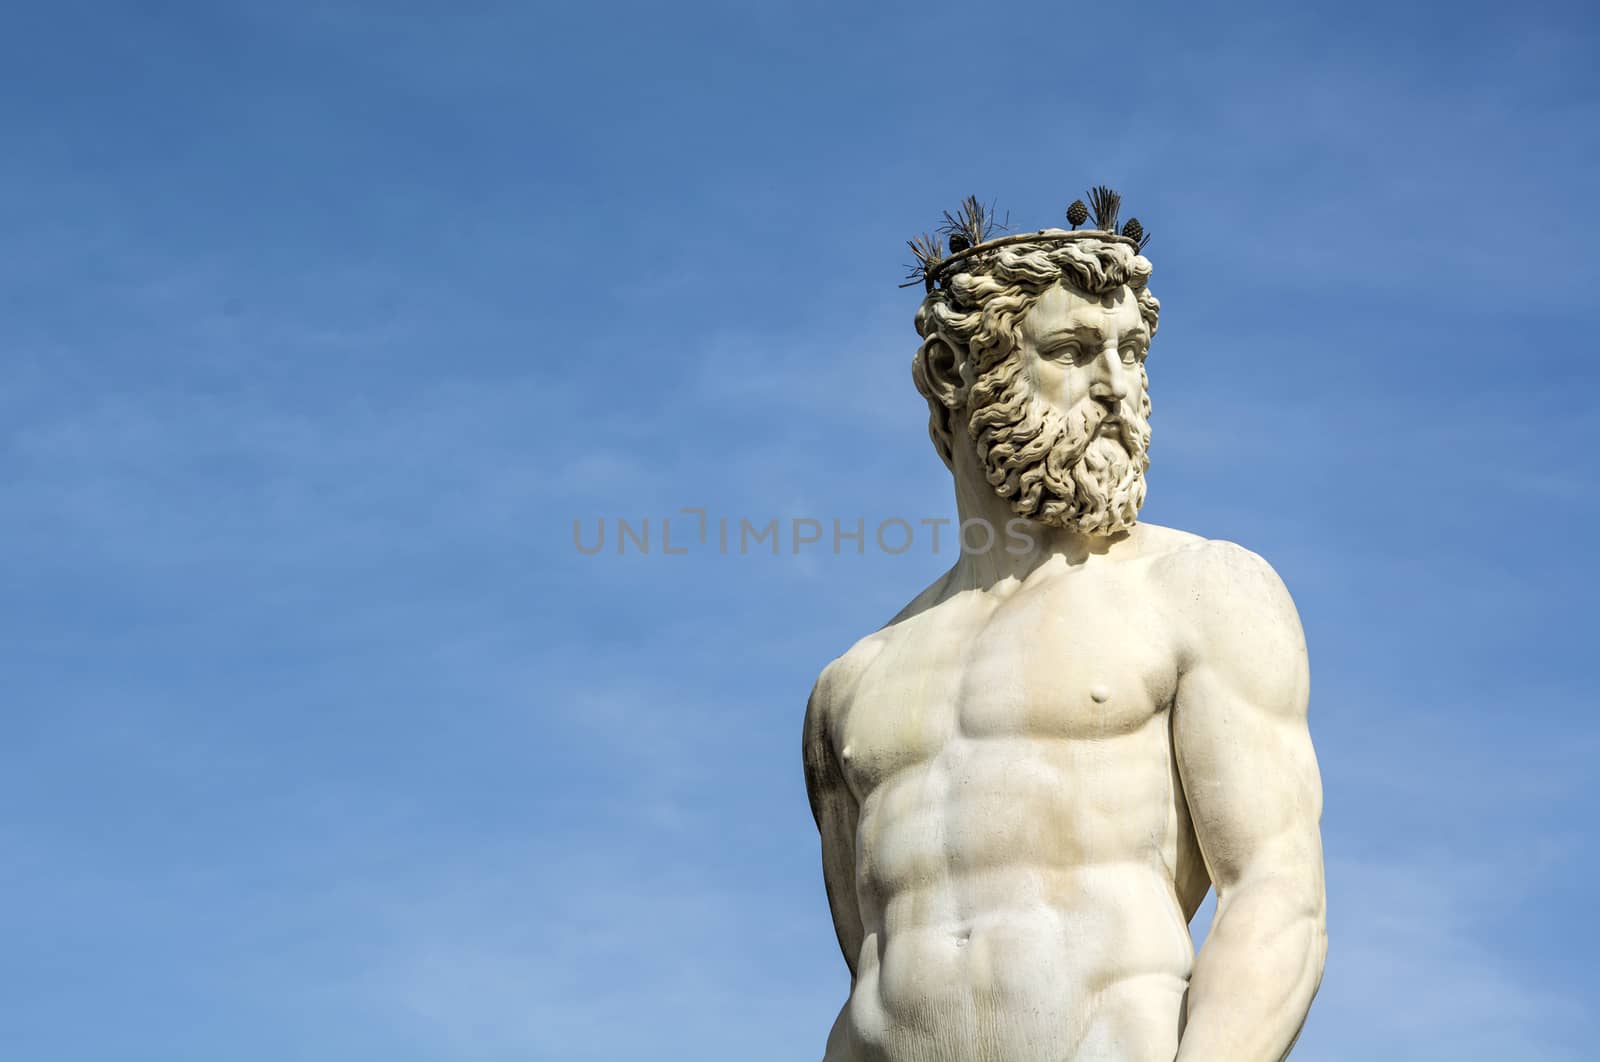 The Fountain of Neptune is a fountain in Florence, Italy, situated on the Piazza della Signoria, in front of the Palazzo Vecchio. The fountain was commissioned in 1565 and is the work of the sculptor Bartolomeo Ammannati.